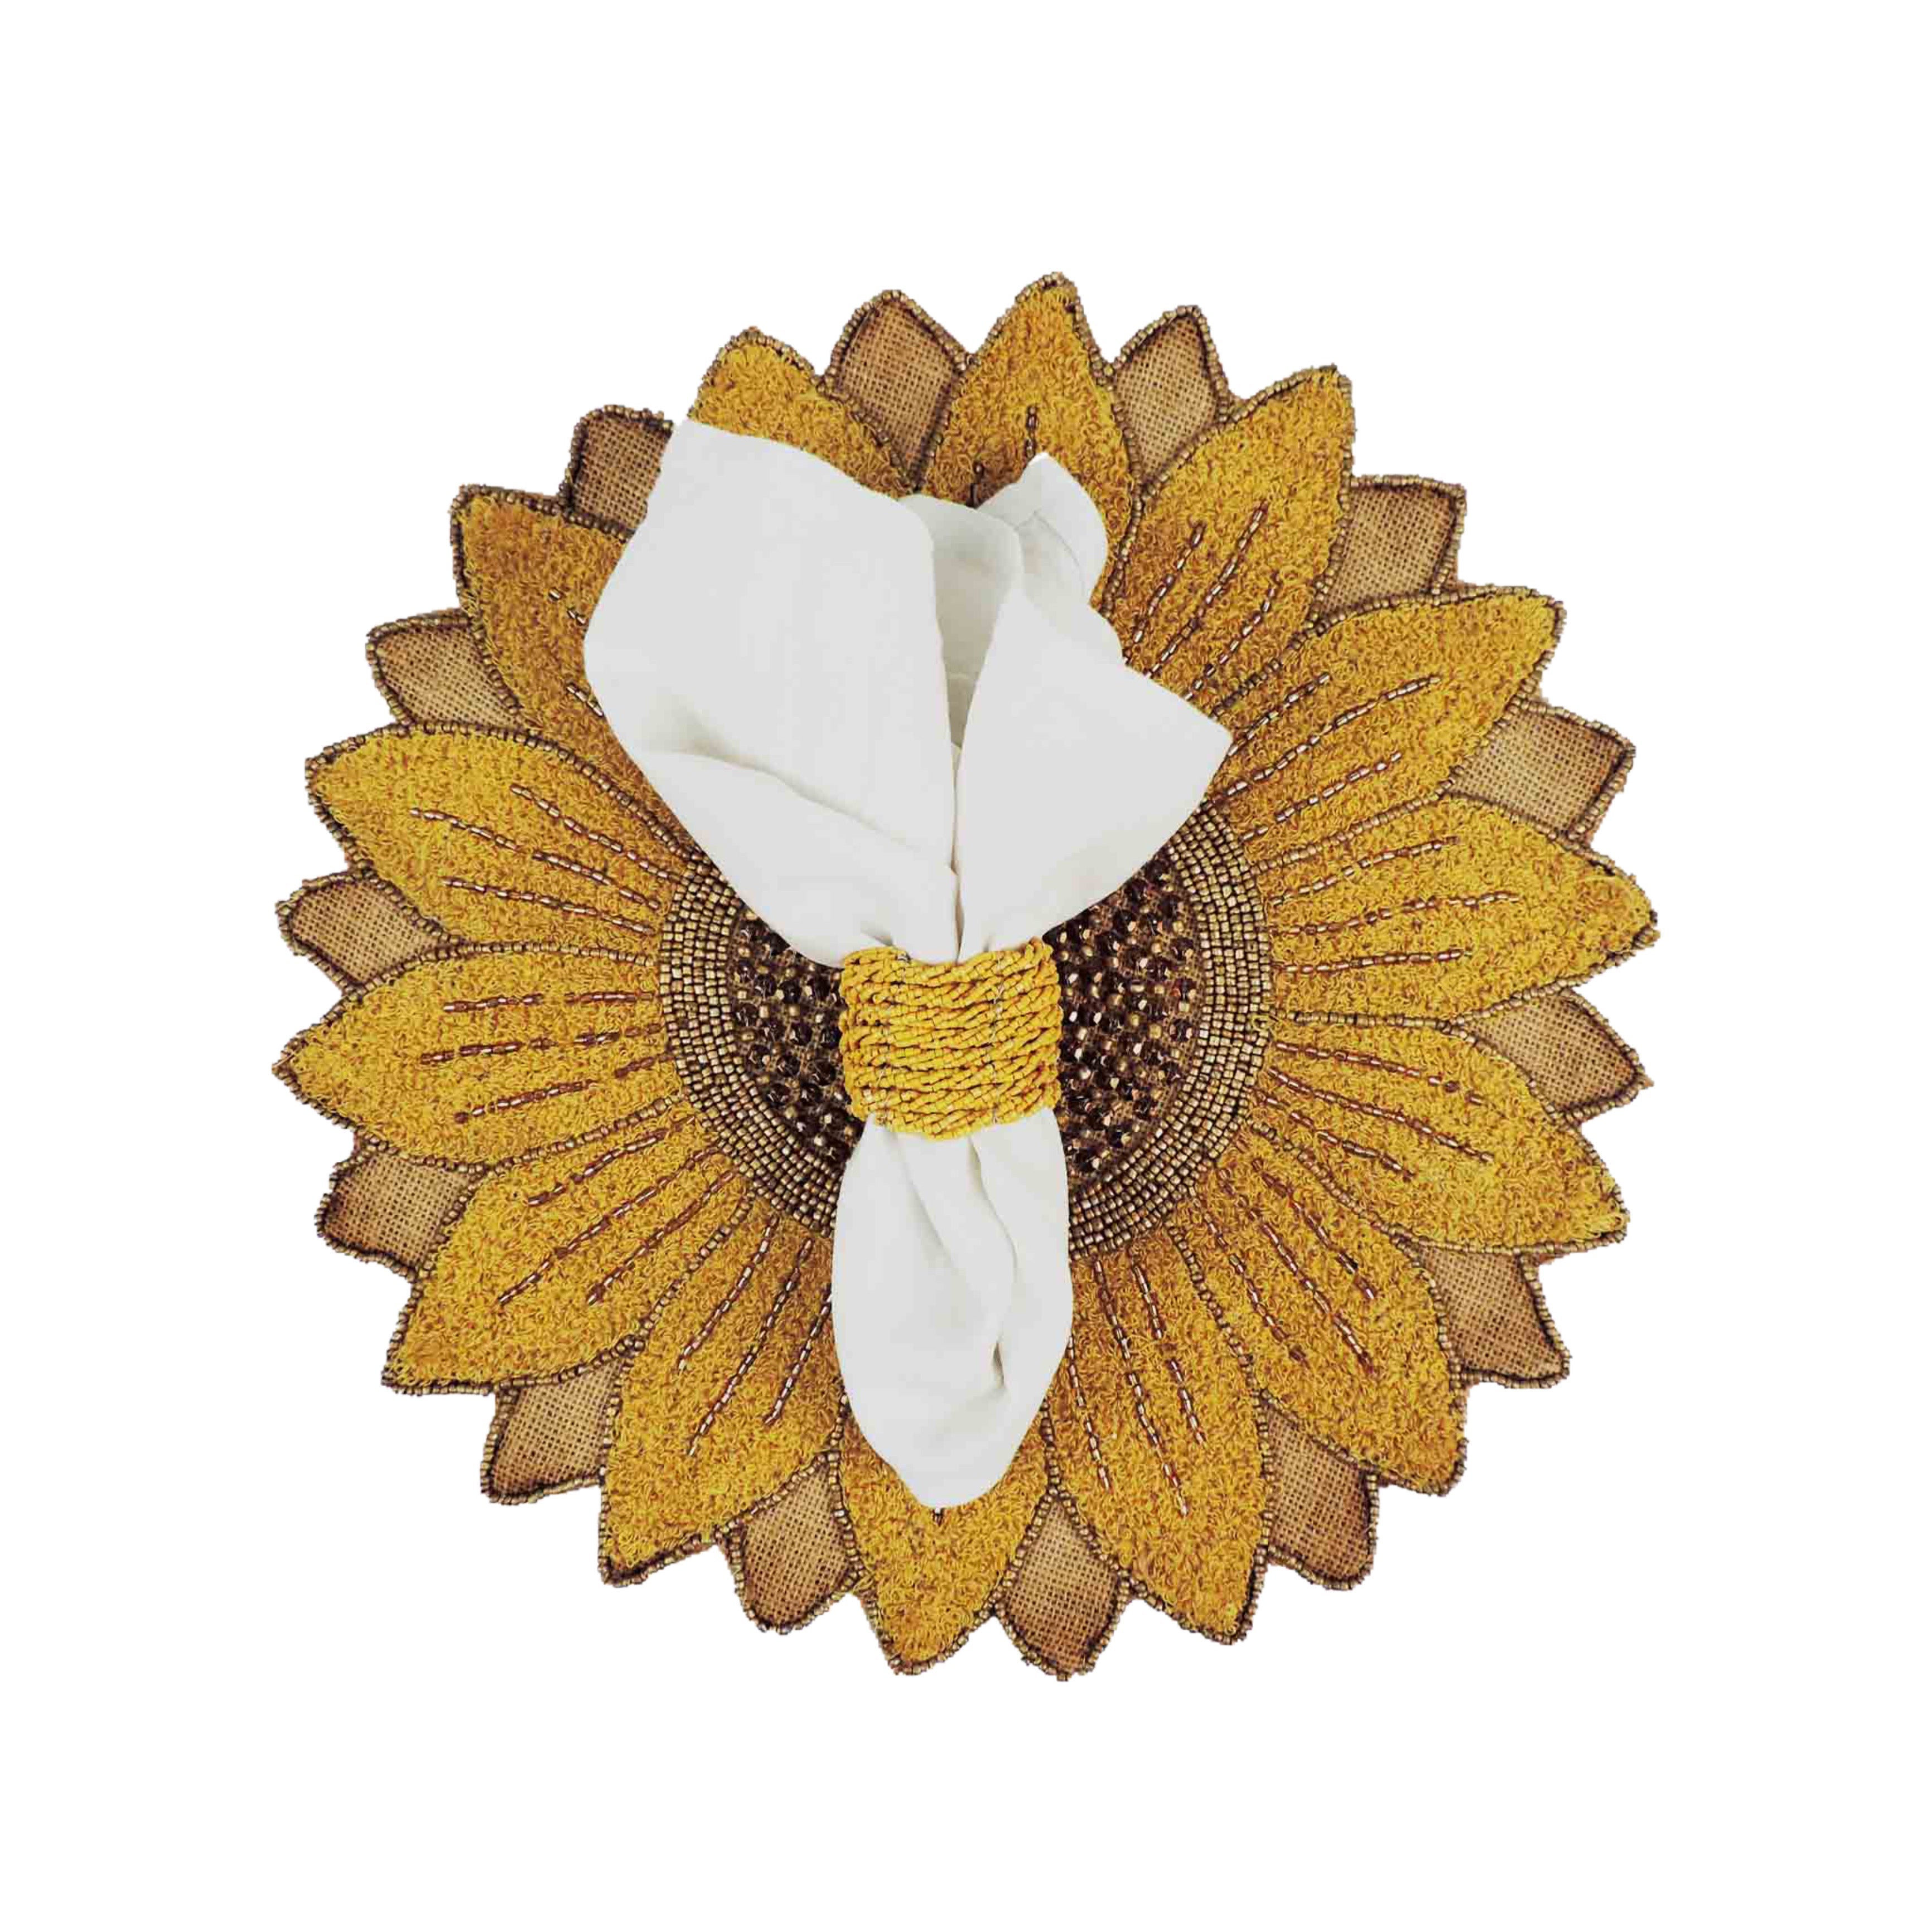 Sunflower Bead Table Setting for 4 - Embroidered Placemats, Napkin Rings & Table Runner in Natural & Gold